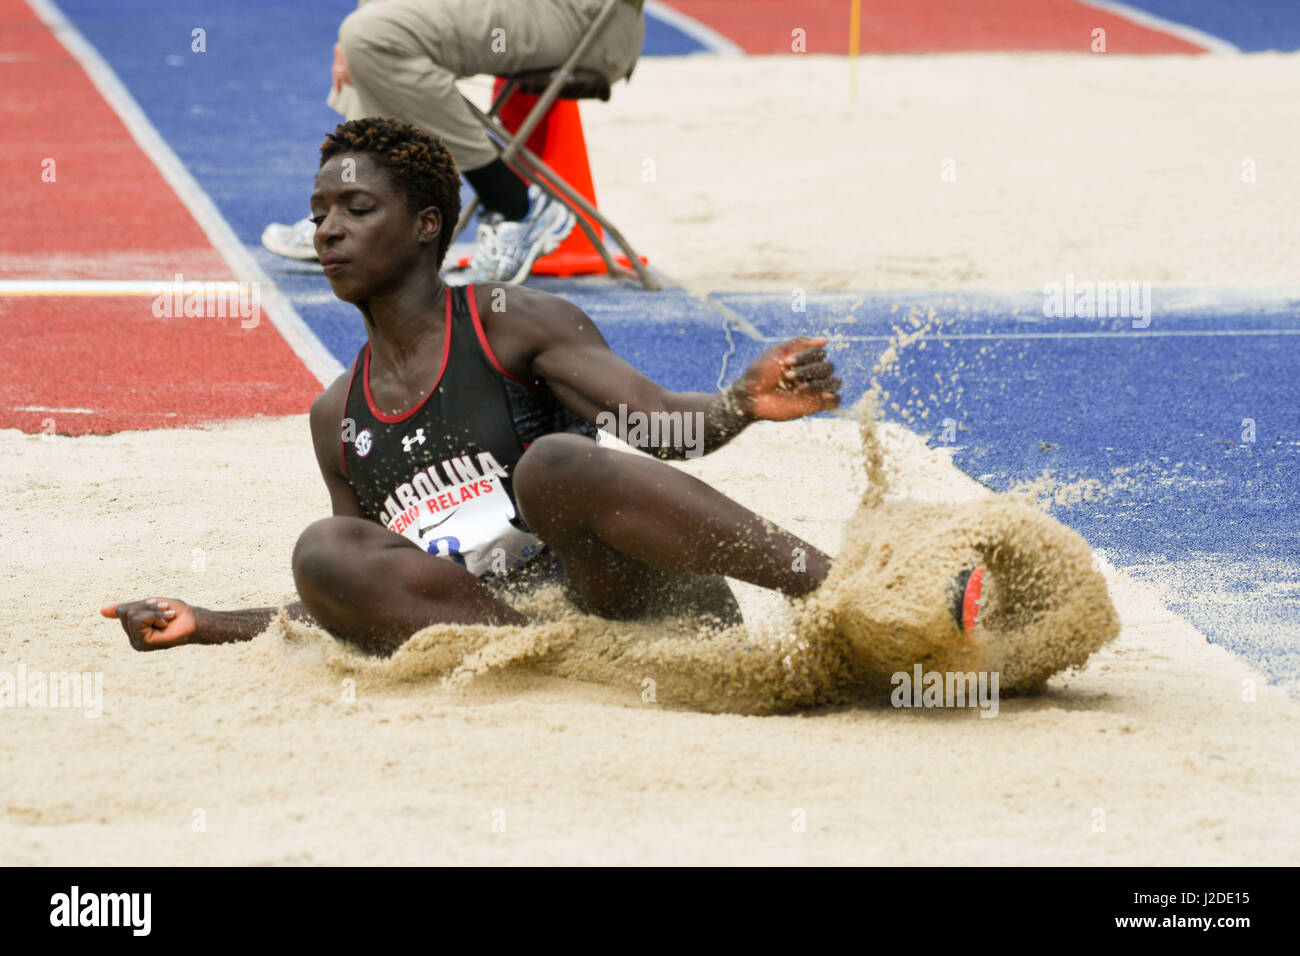 Philadelphia, Pennsylvania, USA. 27th Apr, 2017. ROUGUI SOW (2) of South Carolina, competes in the college women's long jump championship and won, at the 123 running of the Penn Relays at the historic Franklin Field in Philadelphia Pa Credit: Ricky Fitchett/ZUMA Wire/Alamy Live News Stock Photo